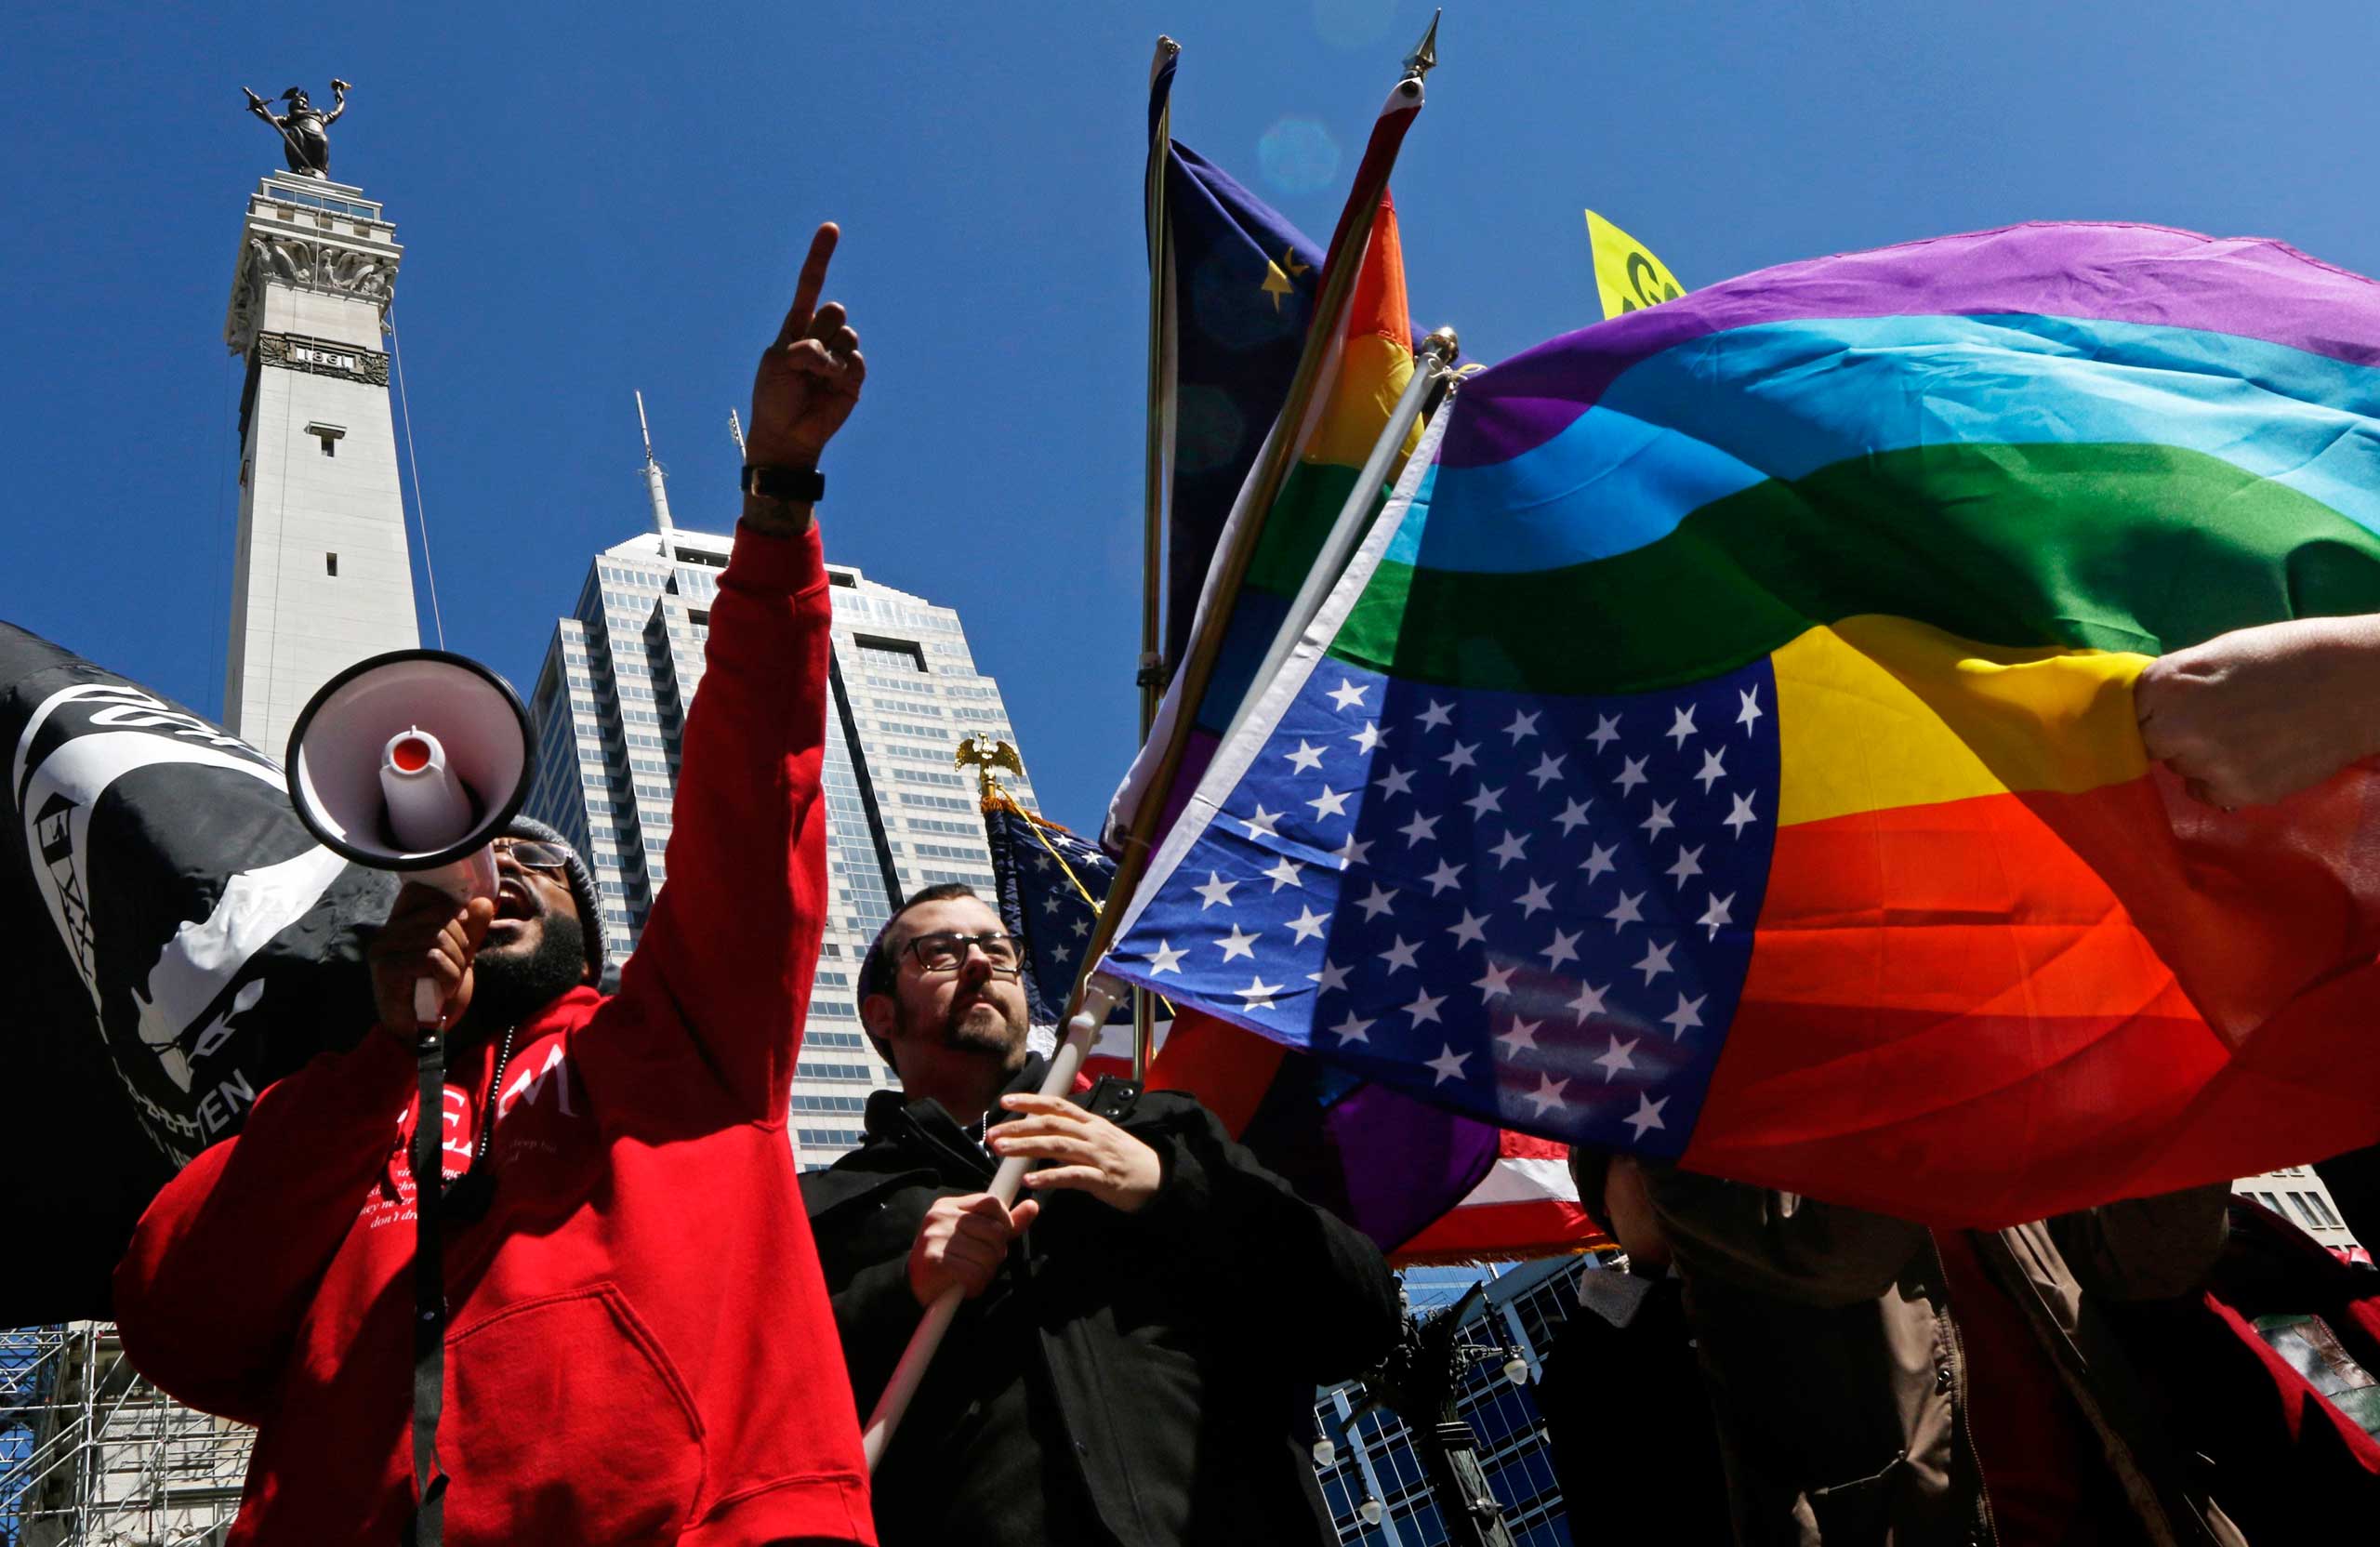 Organizers fire up a crowd of demonstrators gathered to protest a controversial religious freedom bill recently signed by Governor Mike Pence, in Indianapolis on March 28, 2015.